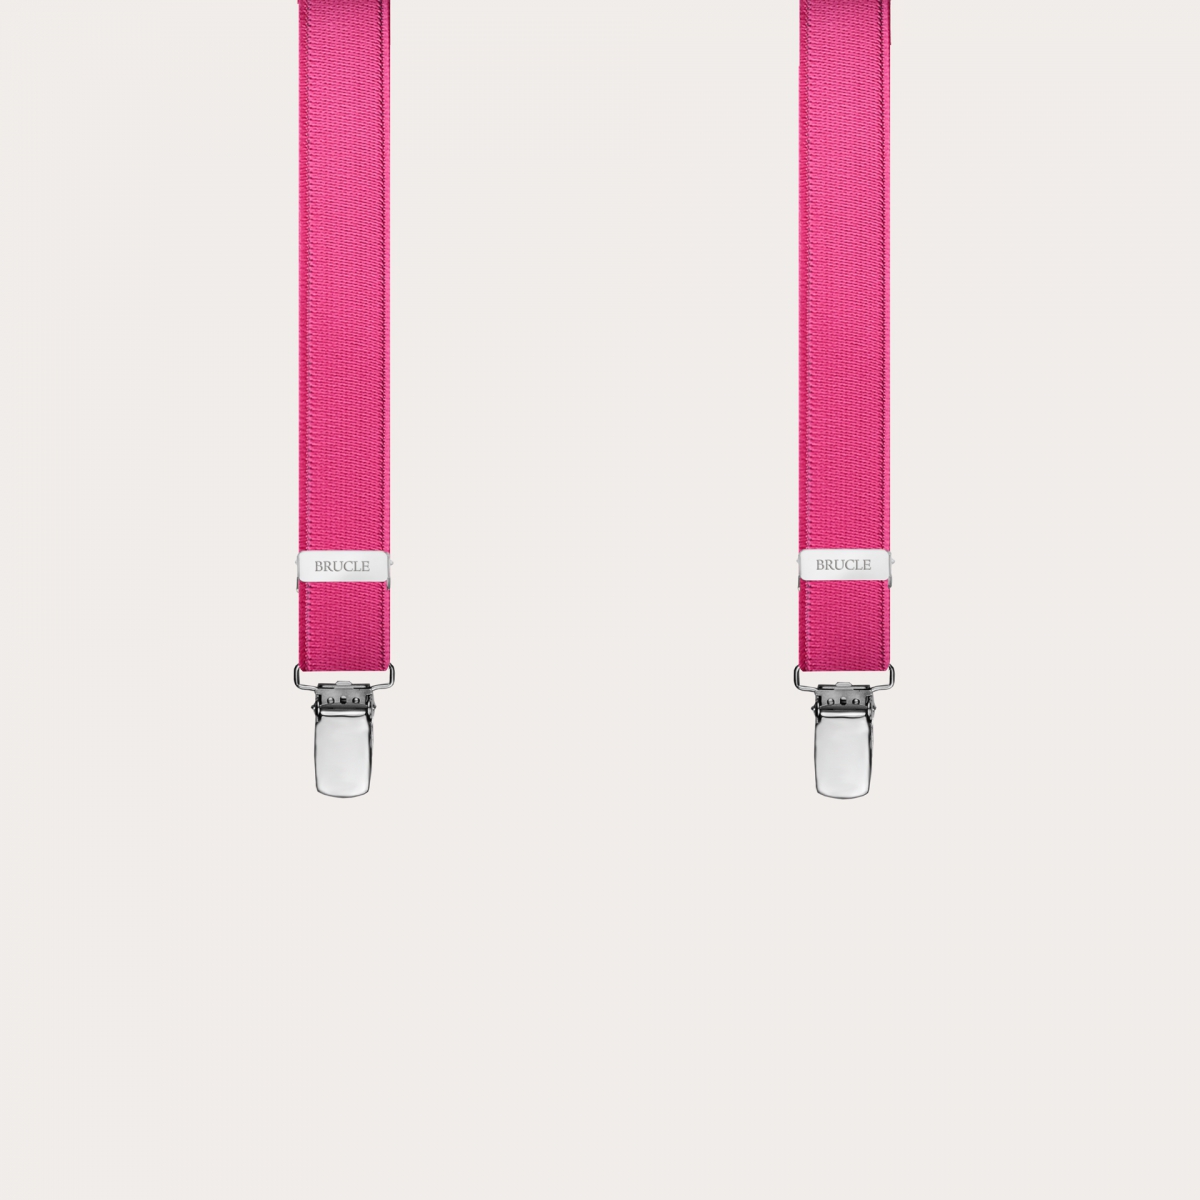 Brucle skinny Y-shape elastic suspenders with clips, satin fuchsia